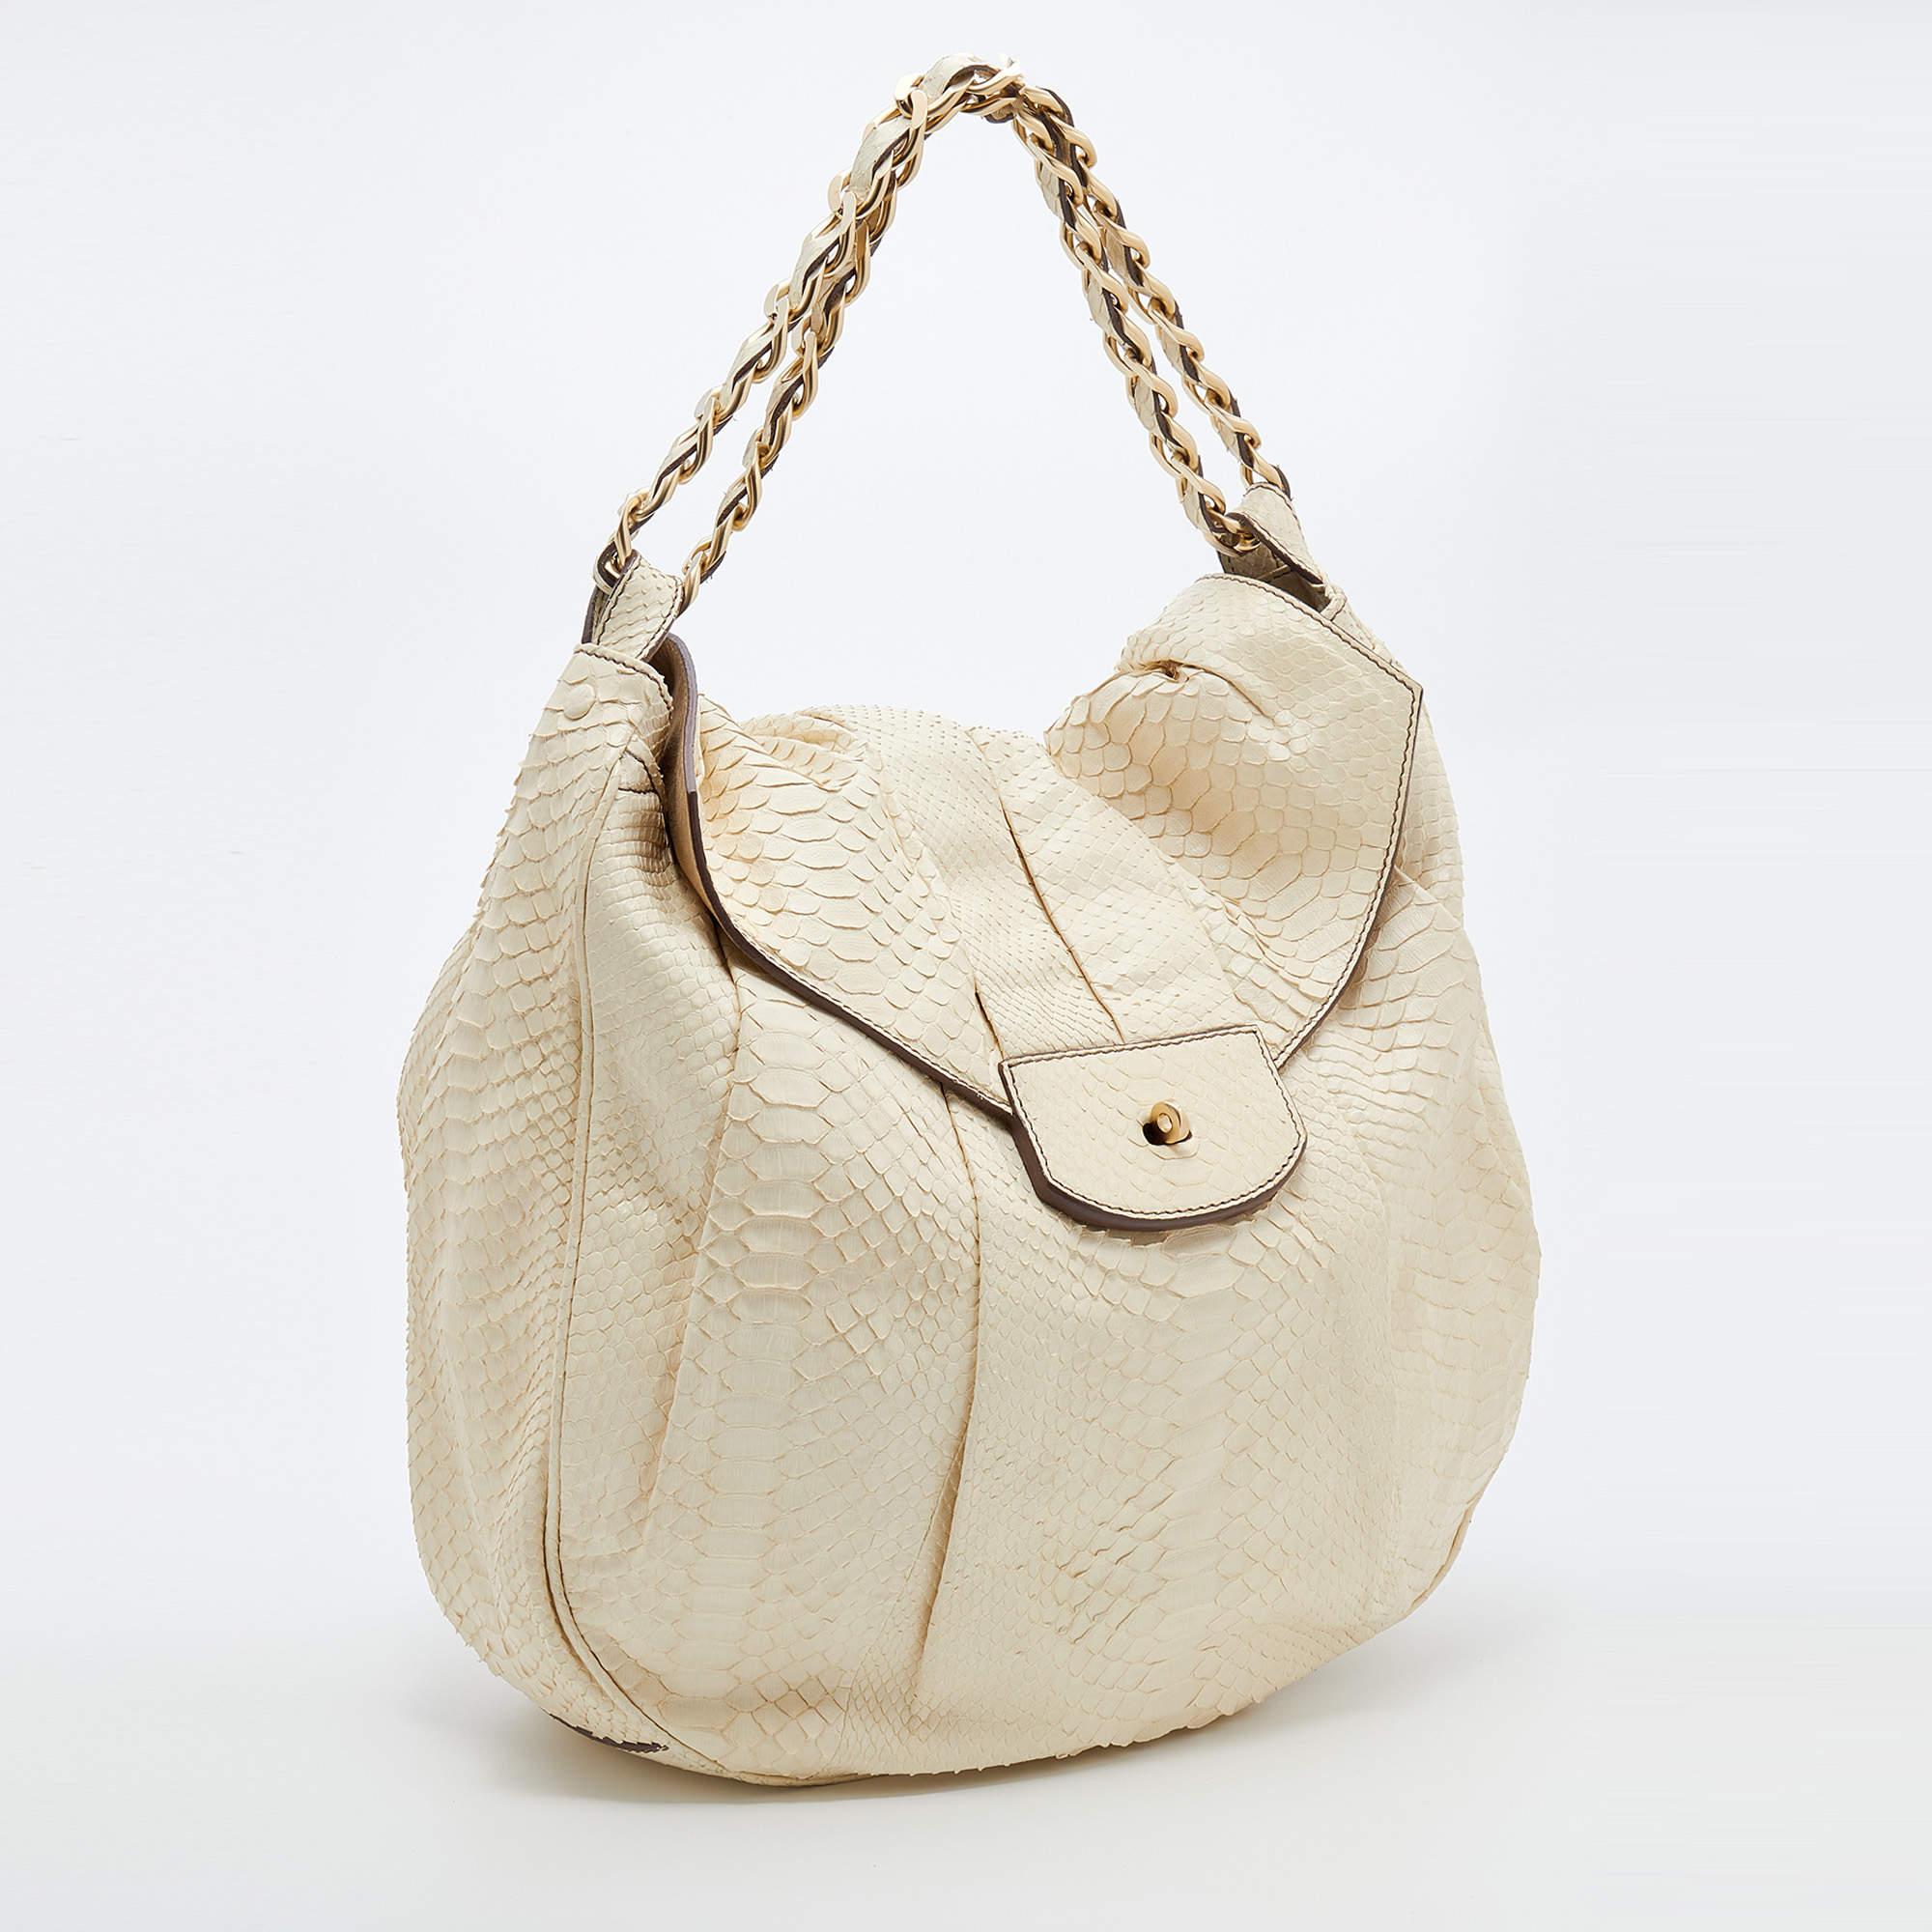 Swing and twirl in every stride and let your audience gasp in admiration at the beautiful sight of this Zagliani hobo. We rarely get to see a bag as gorgeous as this one. It has been crafted from python and lined with suede on the insides. The bag